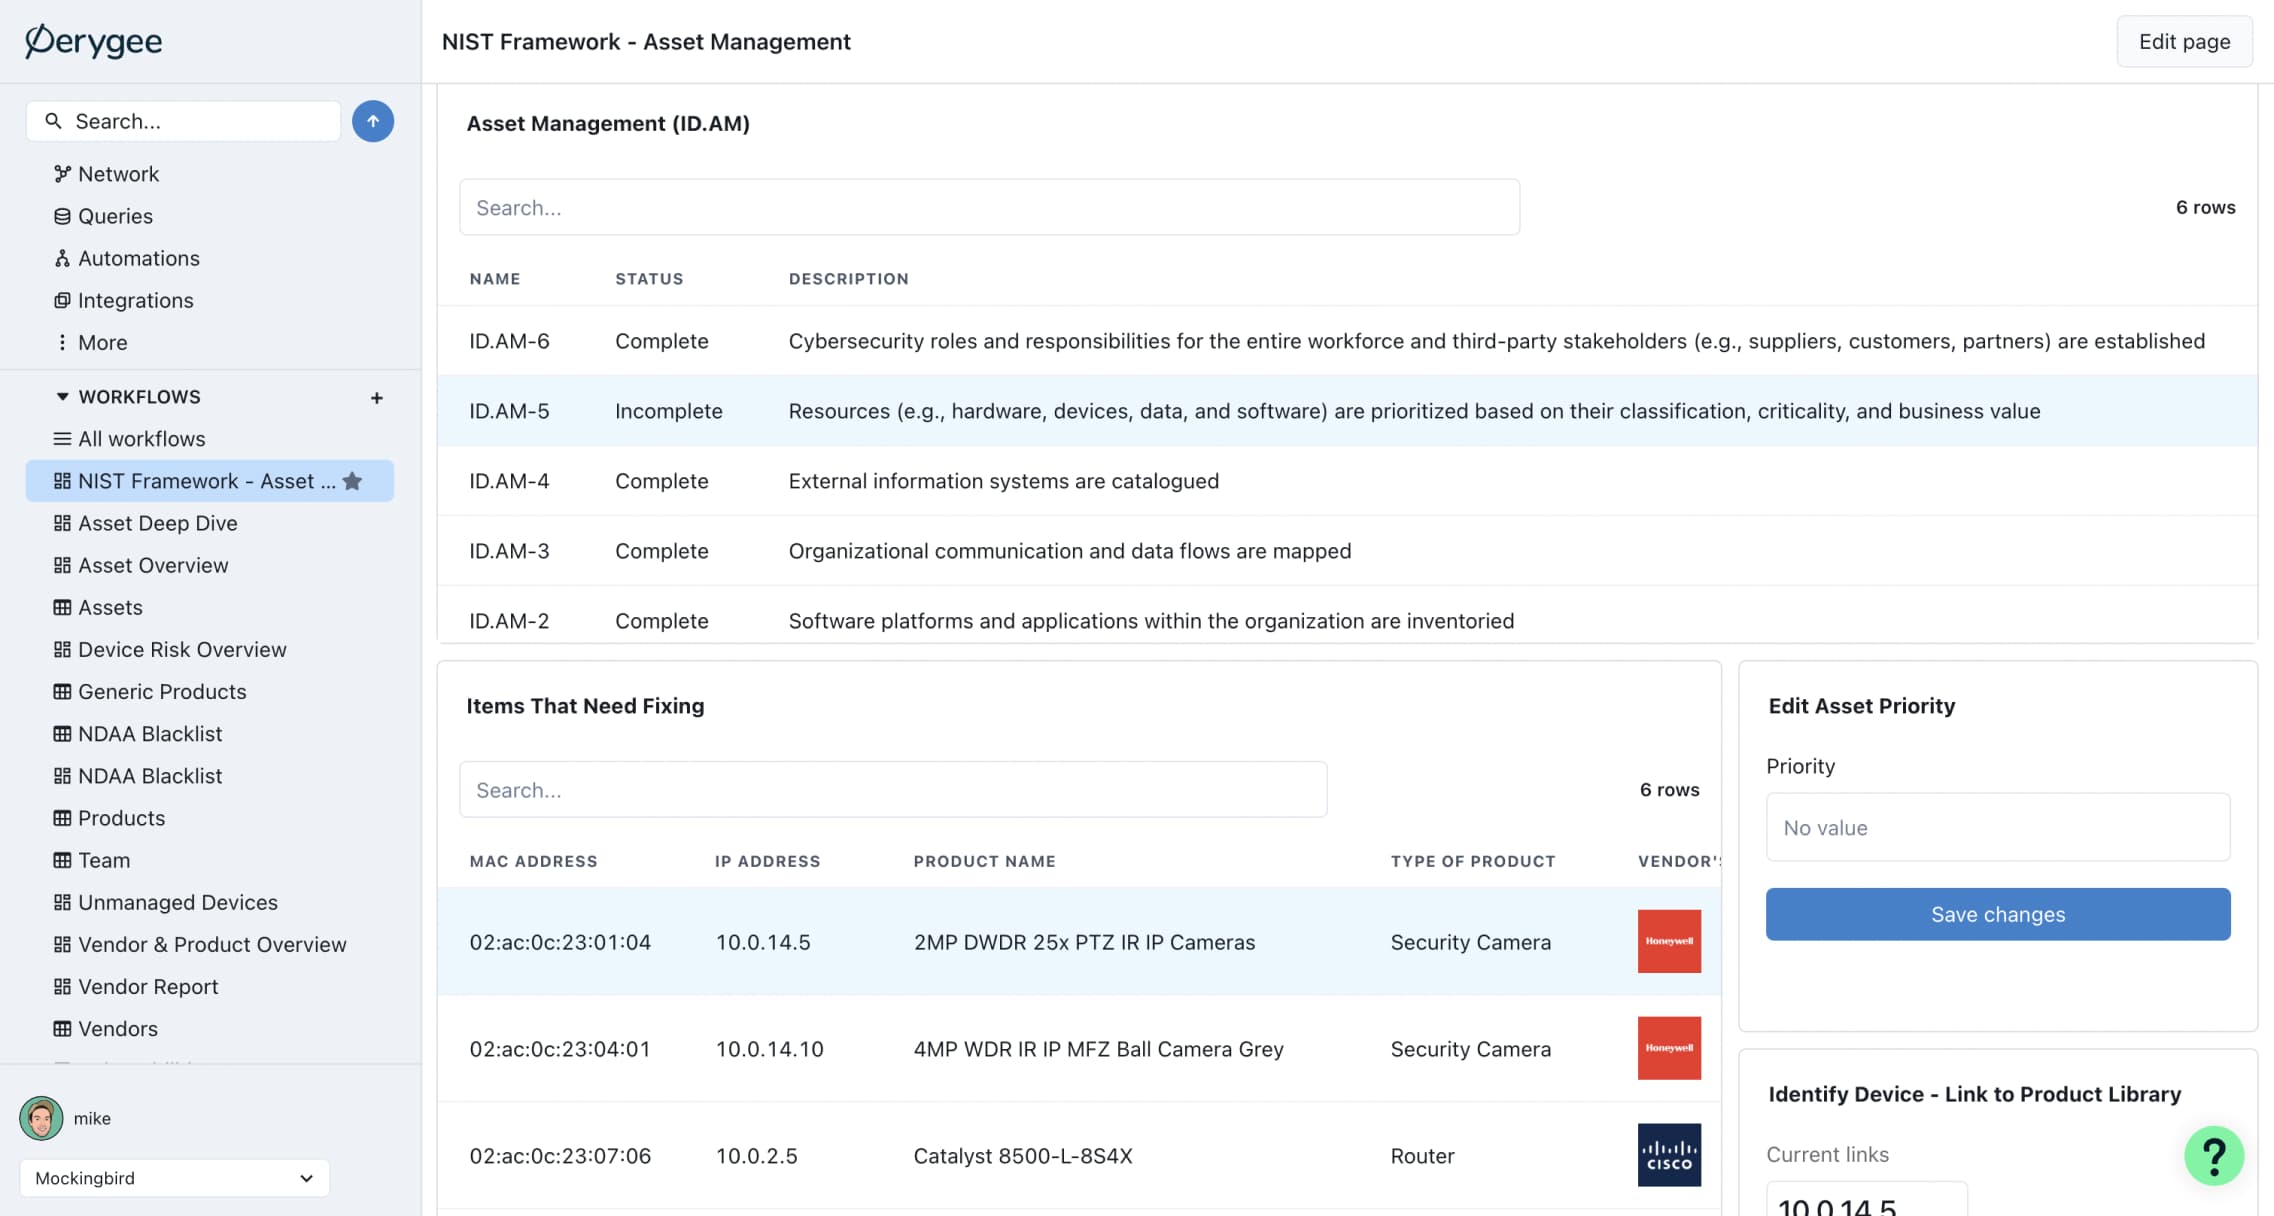 A 'NIST Framework - Asset Management' dashboard in Perygee's platform showing an 'ID.AM' table with complete/incomplete statuses